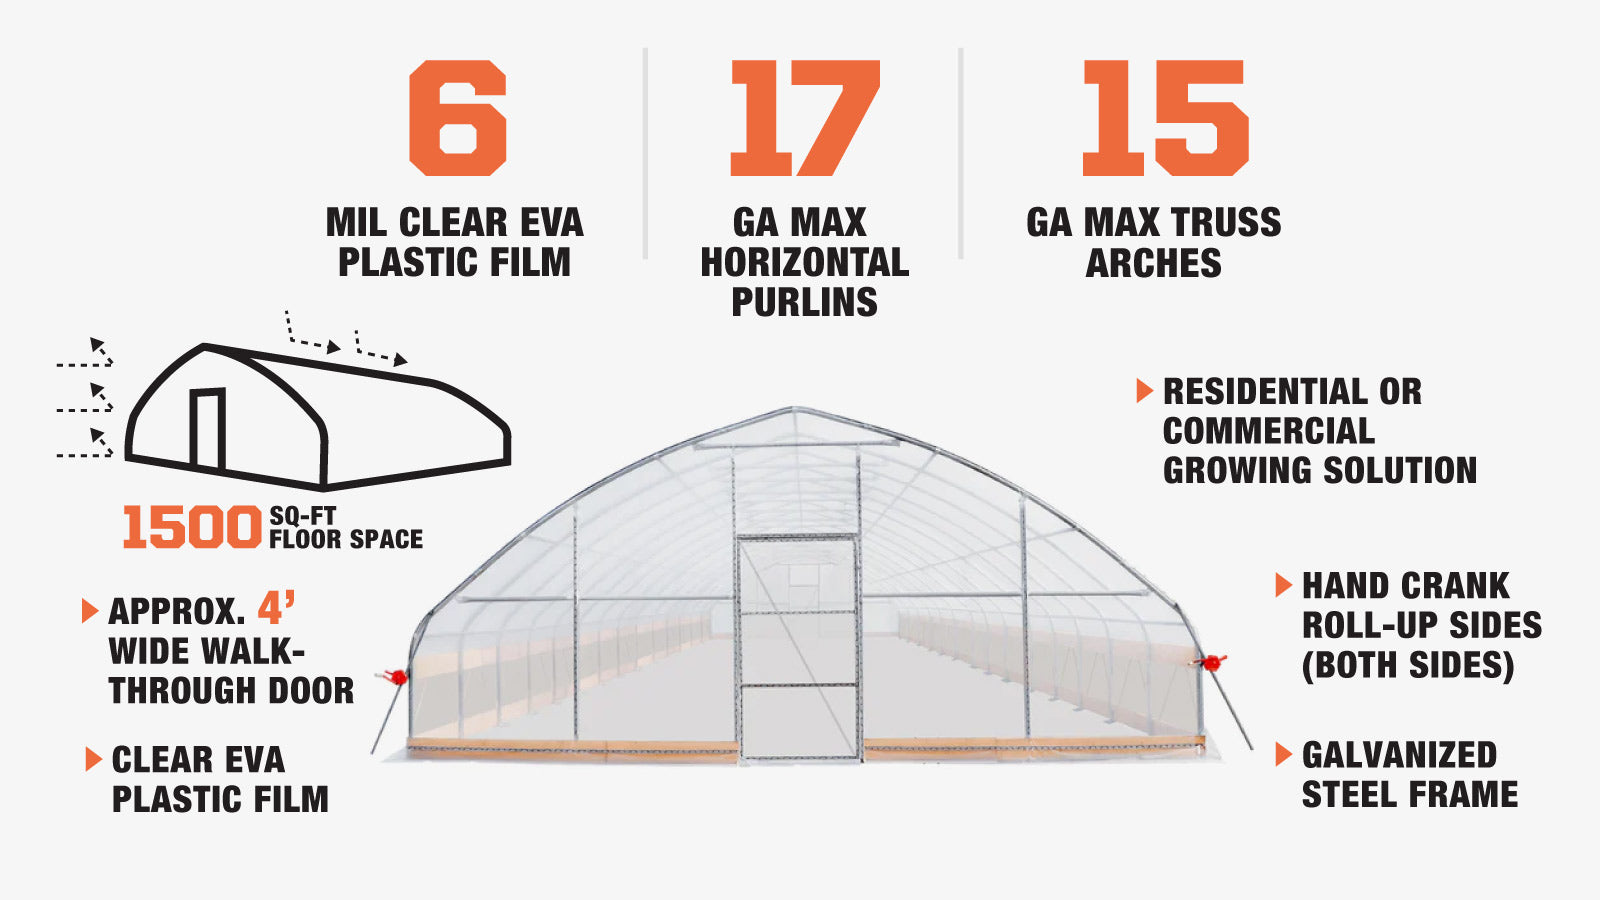 TMG Industrial 25’ x 60’ Tunnel Greenhouse Grow Tent w/6 Mil Clear EVA Plastic Film, Cold Frame, Hand Crank Roll-Up Sides, Peak Ceiling Roof, TMG-GH2560-description-image